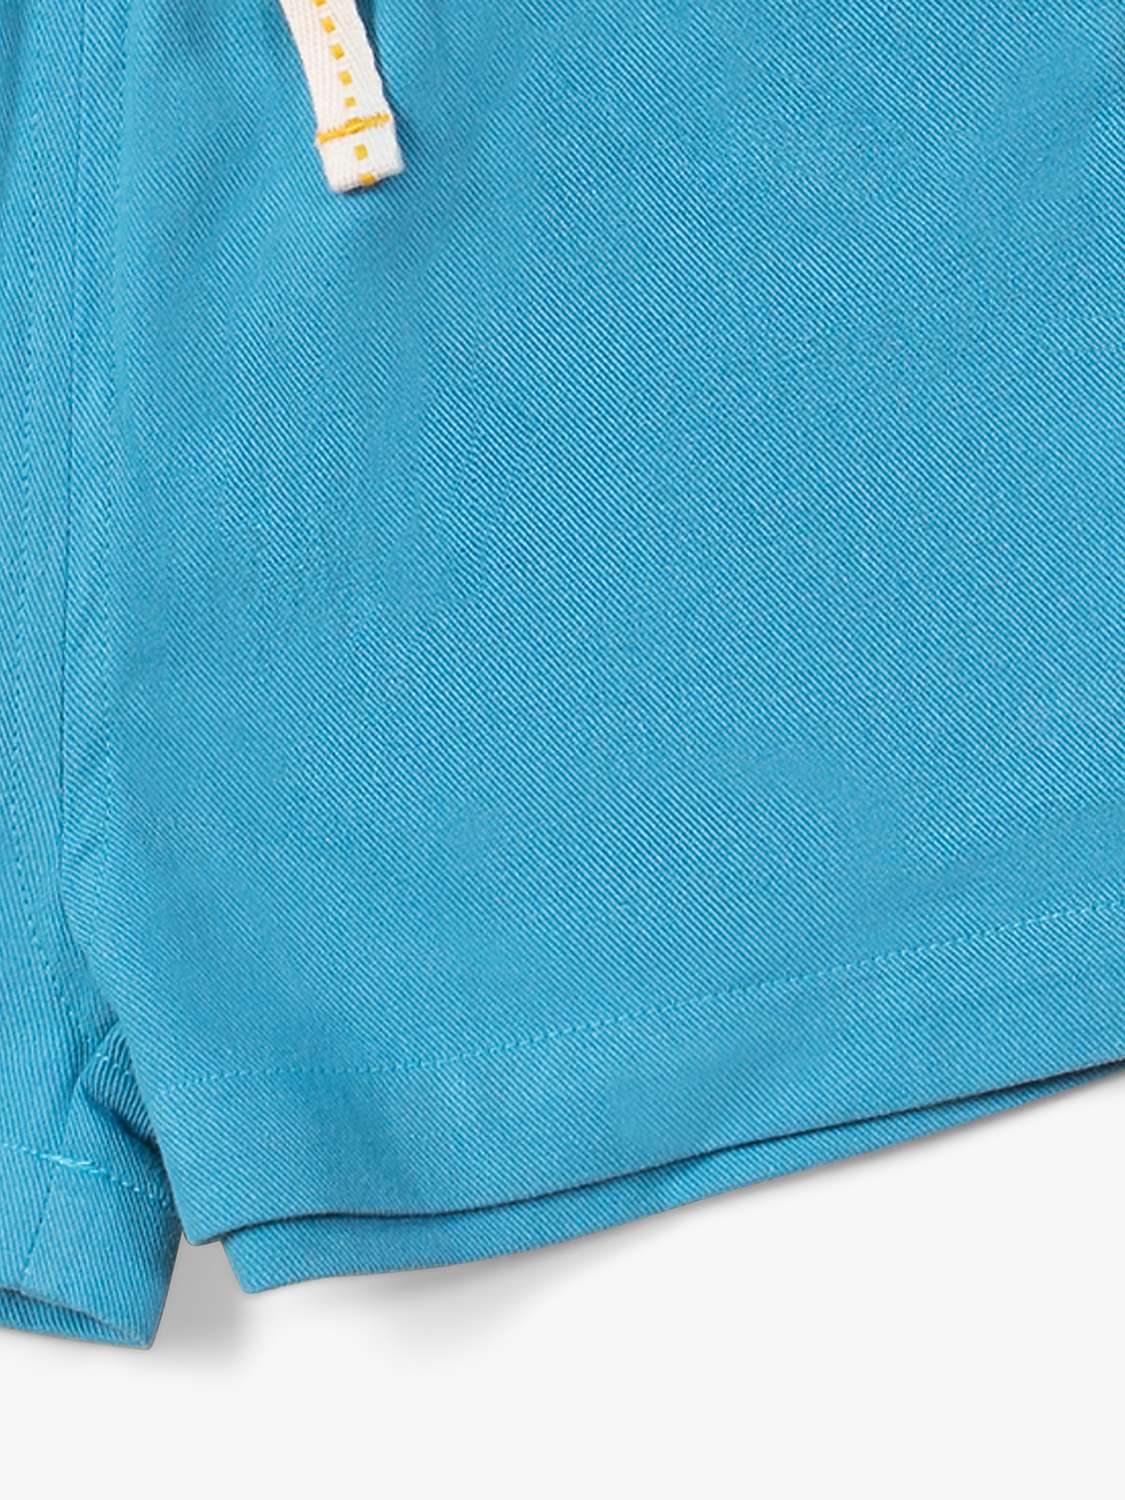 Buy Little Green Radicals Baby By The Sea Organic Cotton Twill Shorts, Blue Moon Online at johnlewis.com